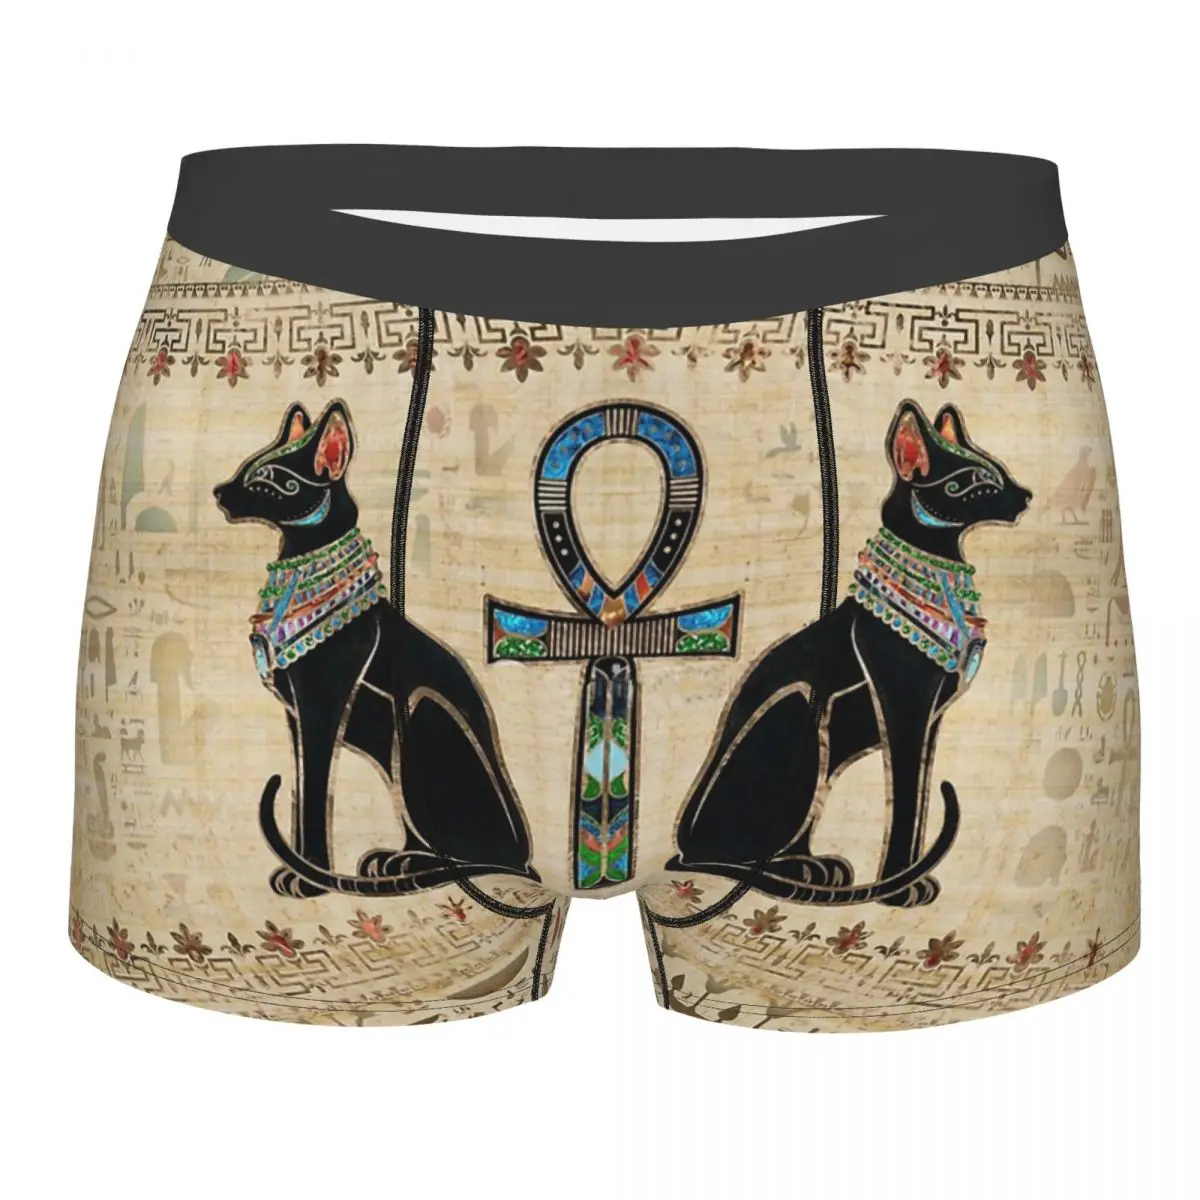 Cats And Ankh Cross Ancient Egypt Men's Boxer Briefs special Highly Breathable Underpants High Quality 3D Print Shorts Gift Idea